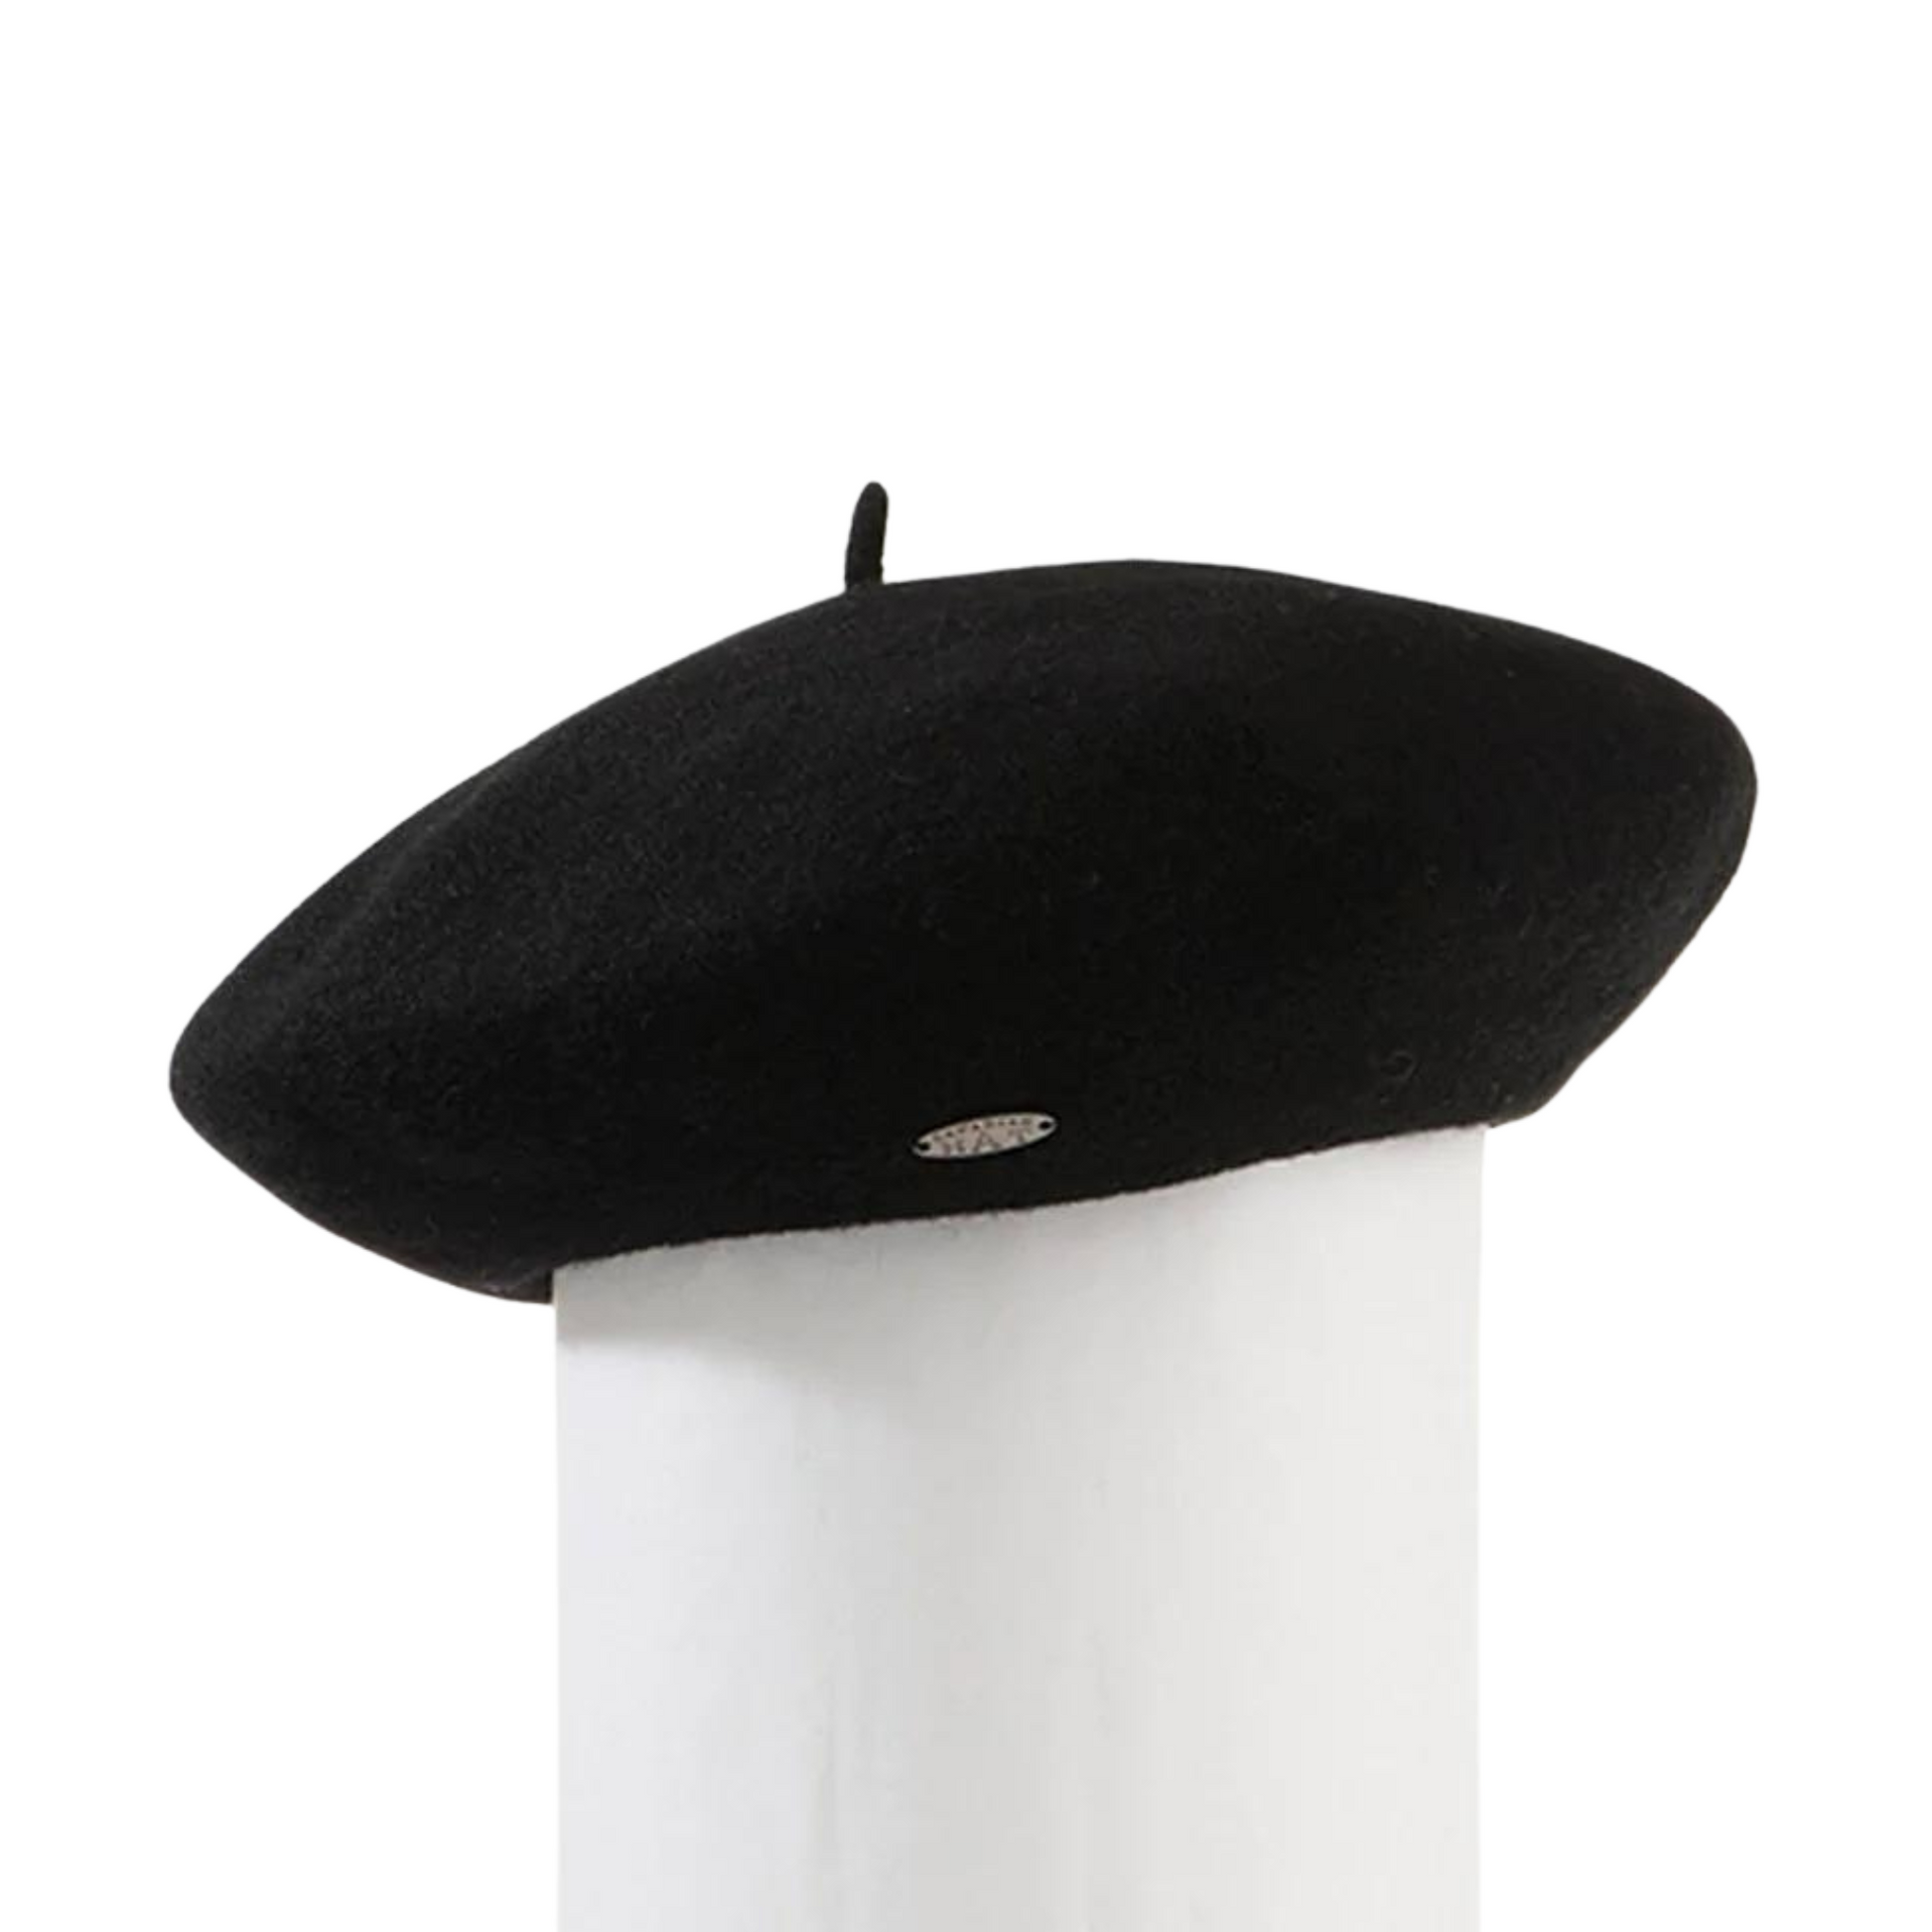 A side view of a black beret.